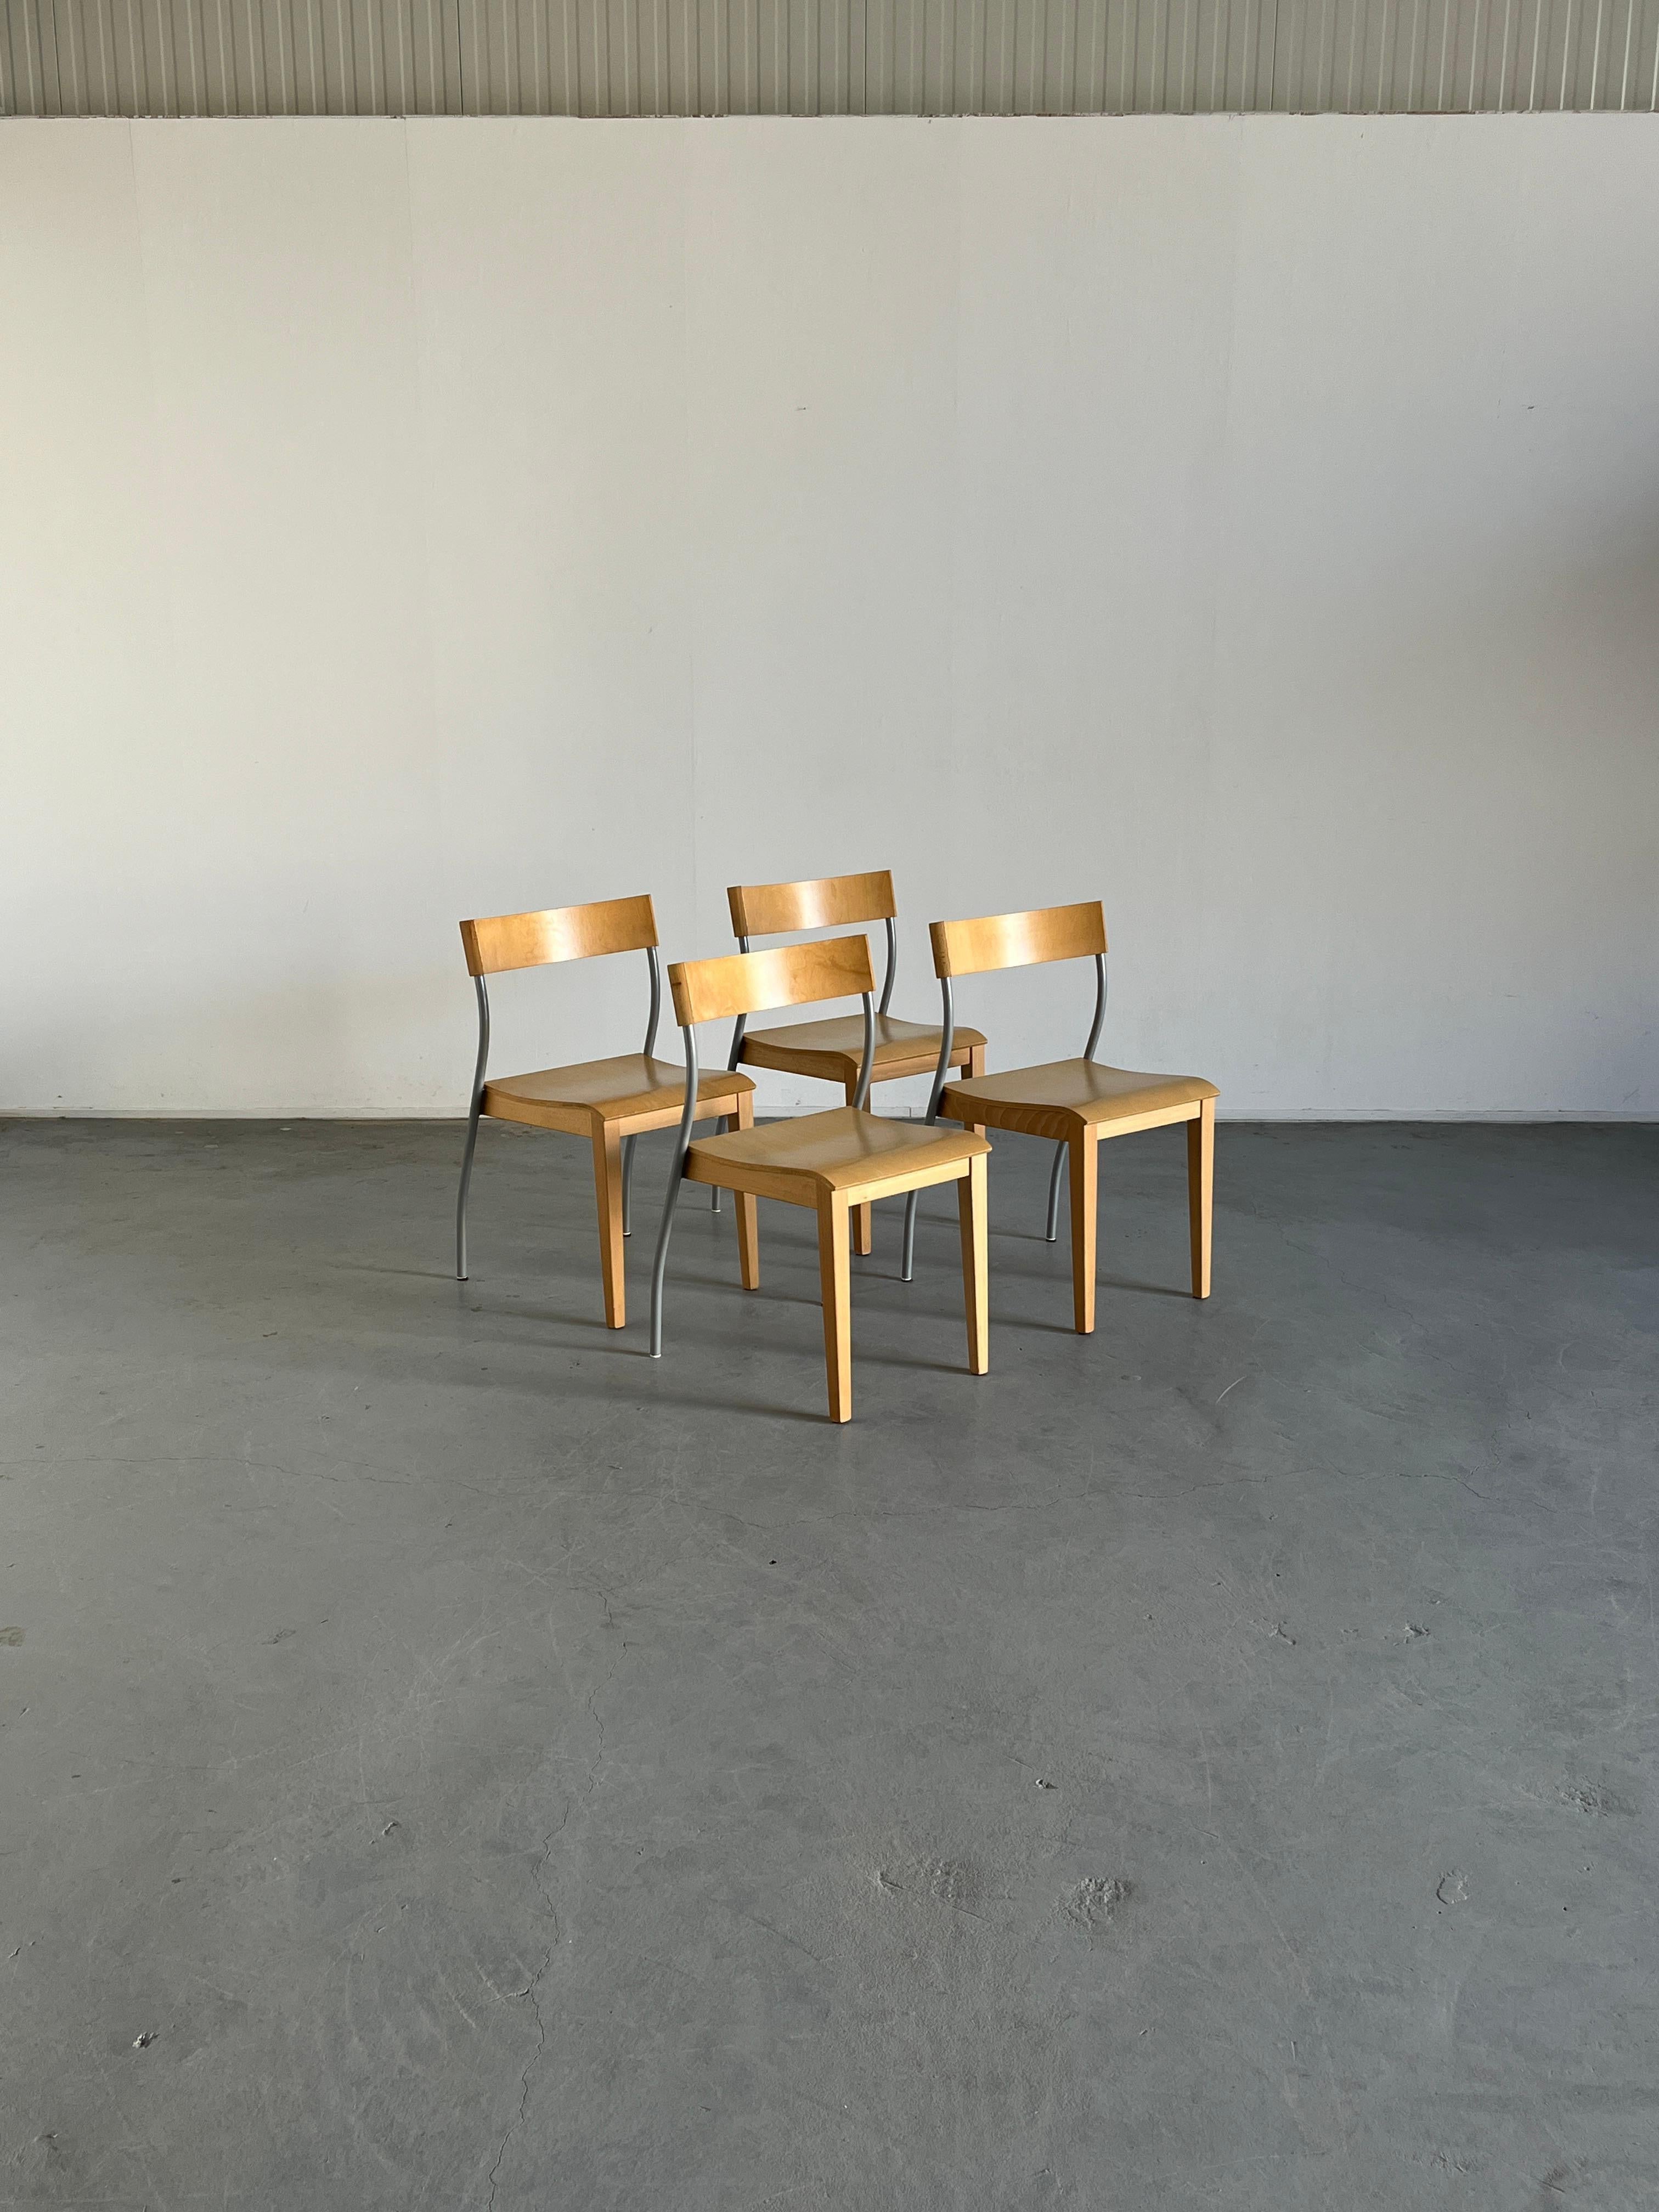 Set of four vintage Ikea 'Nordisk' stackable dining chairs.
Designed by Tina Christensen, 1992.
In the manner of Philippe Starck.
Beech / birch veneer, lacquered steel.

Well preserved and in good condition with smaller expected signs of age, as